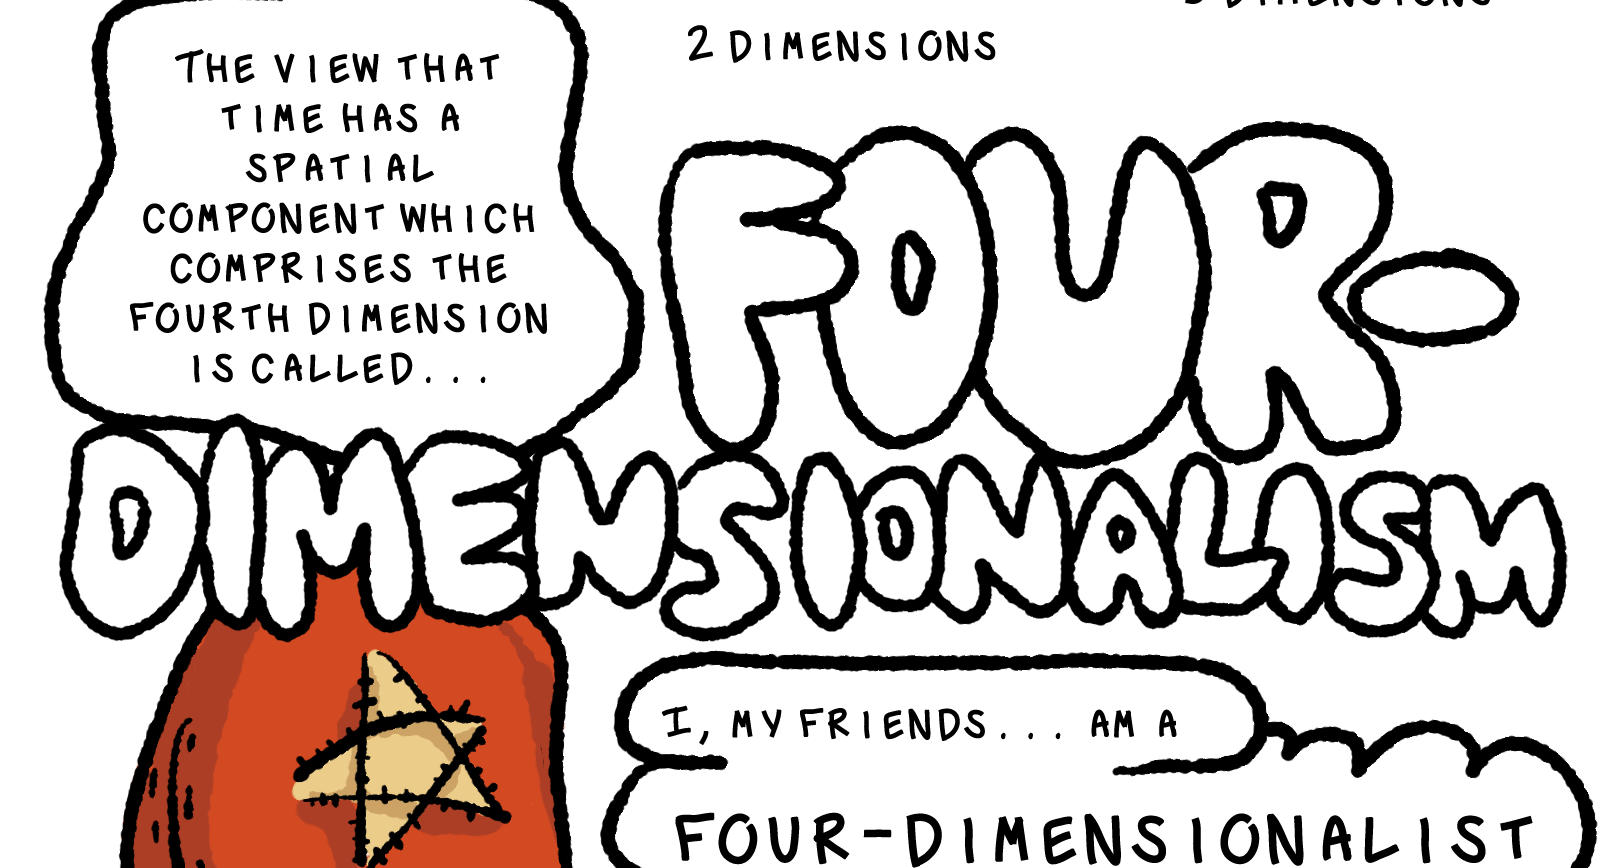 The next text box reads,The veiw that time has a spatial component which comprises the fourth dimesnion is called... FOUR-DIMENSIONALISM, which is emblazoned in big squishy block letters.